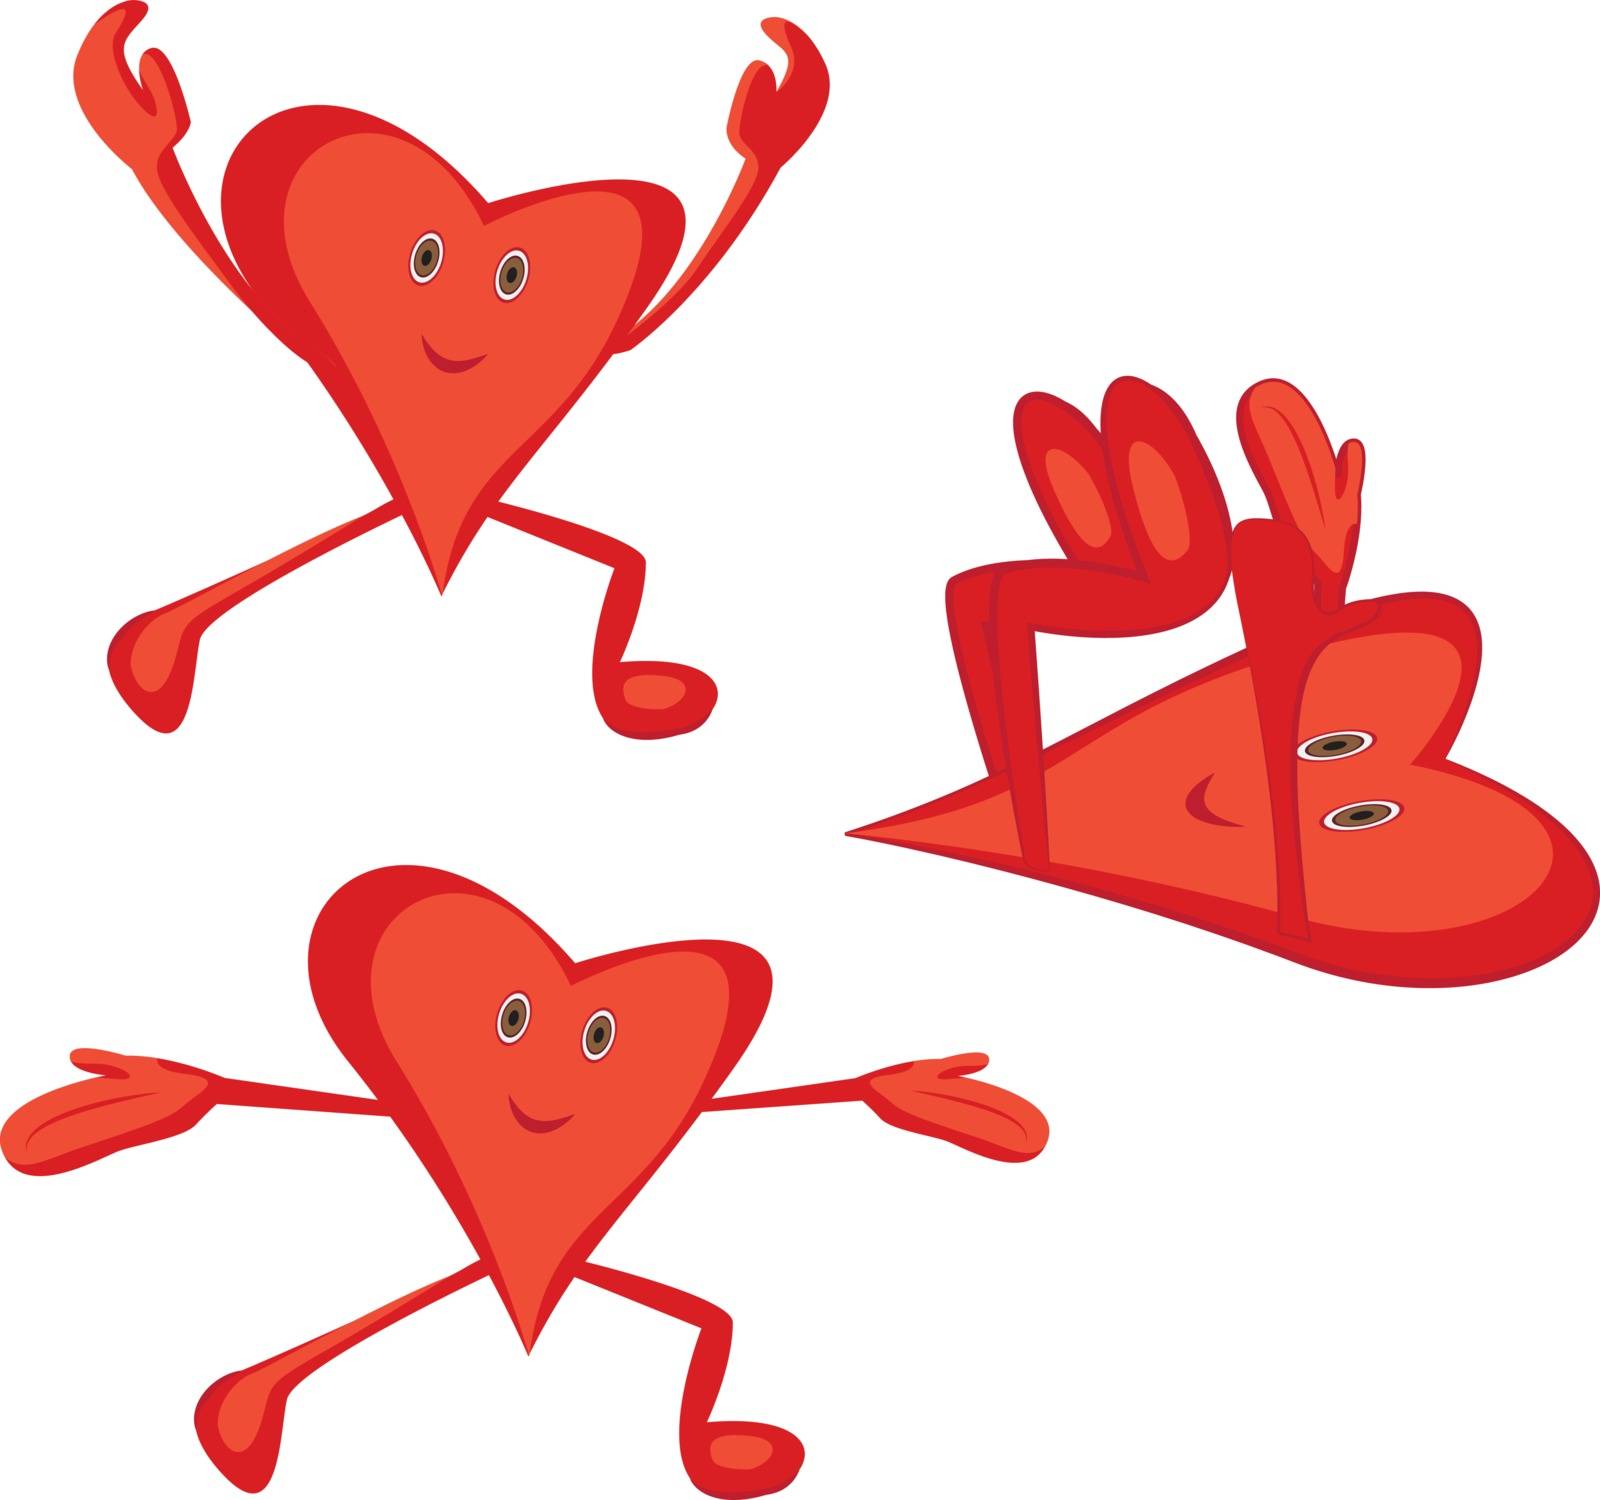 Morning cardio exercises for a healthy heart concept by Olena758